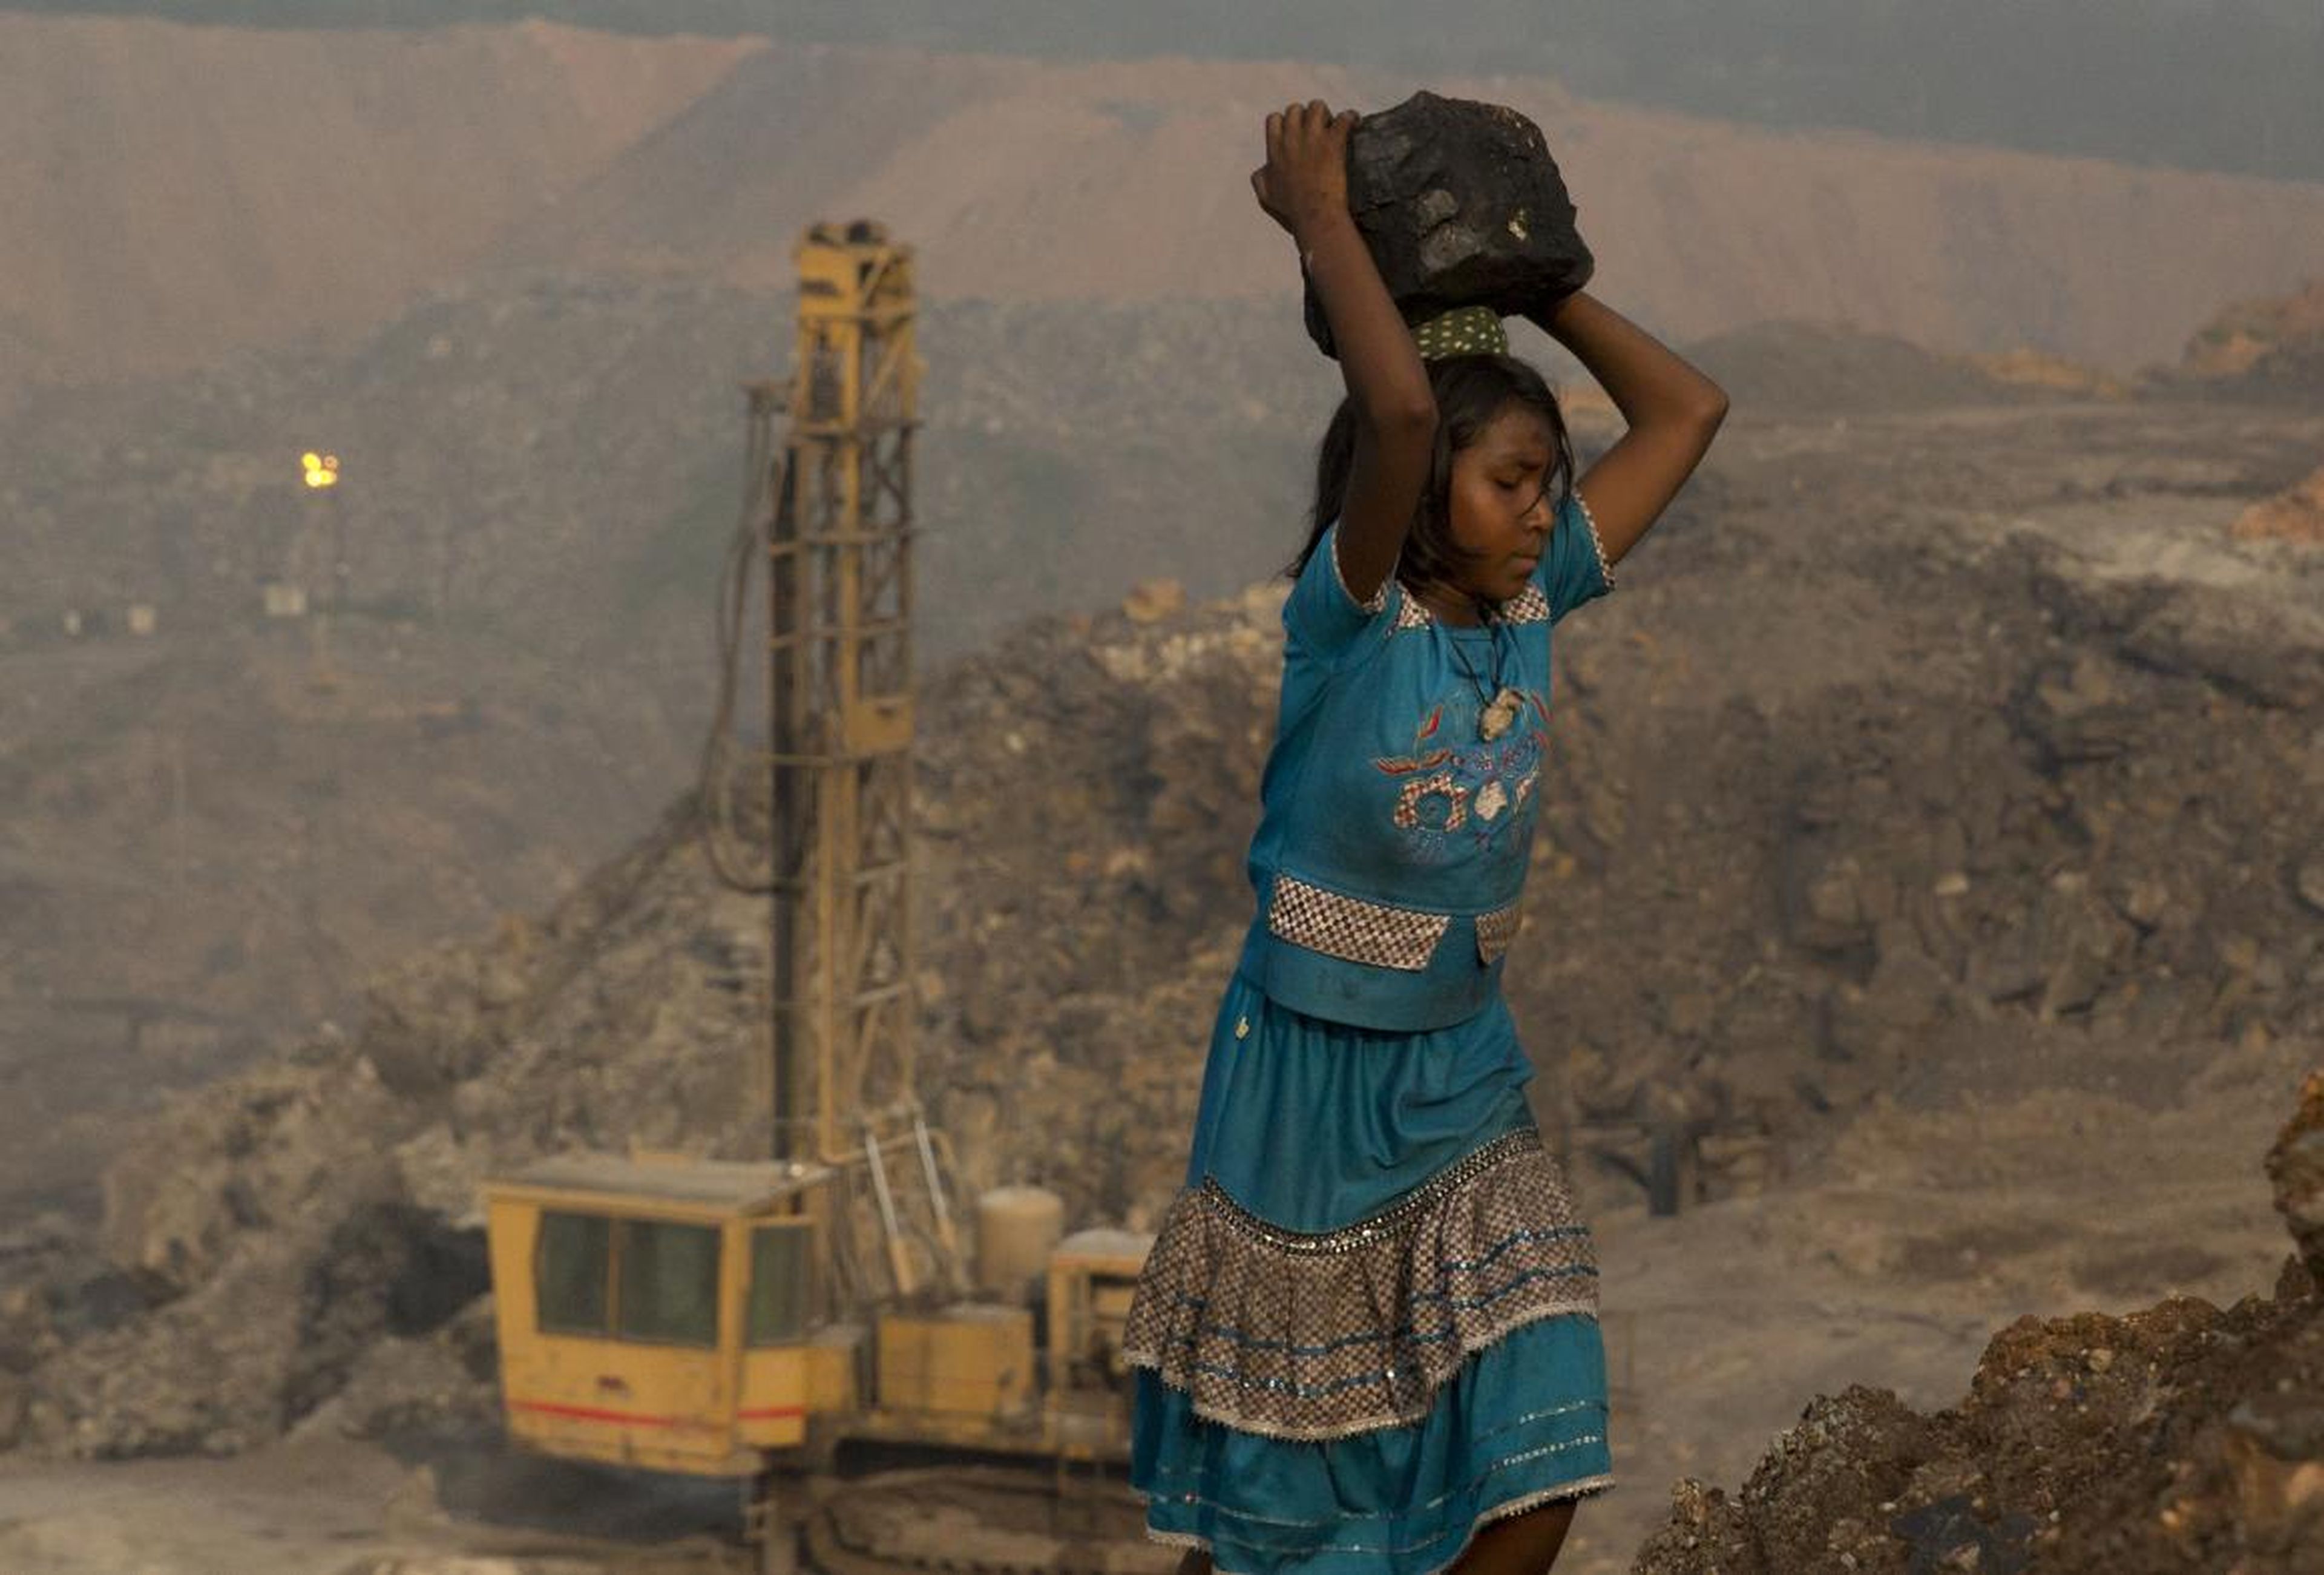 3. Many illegal coal miners in India are from the country's Adivasi indigenous people. The rapid growth of the industry and India's economy has seen many Advasis forced off their traditional land, where they've hunted and cropped